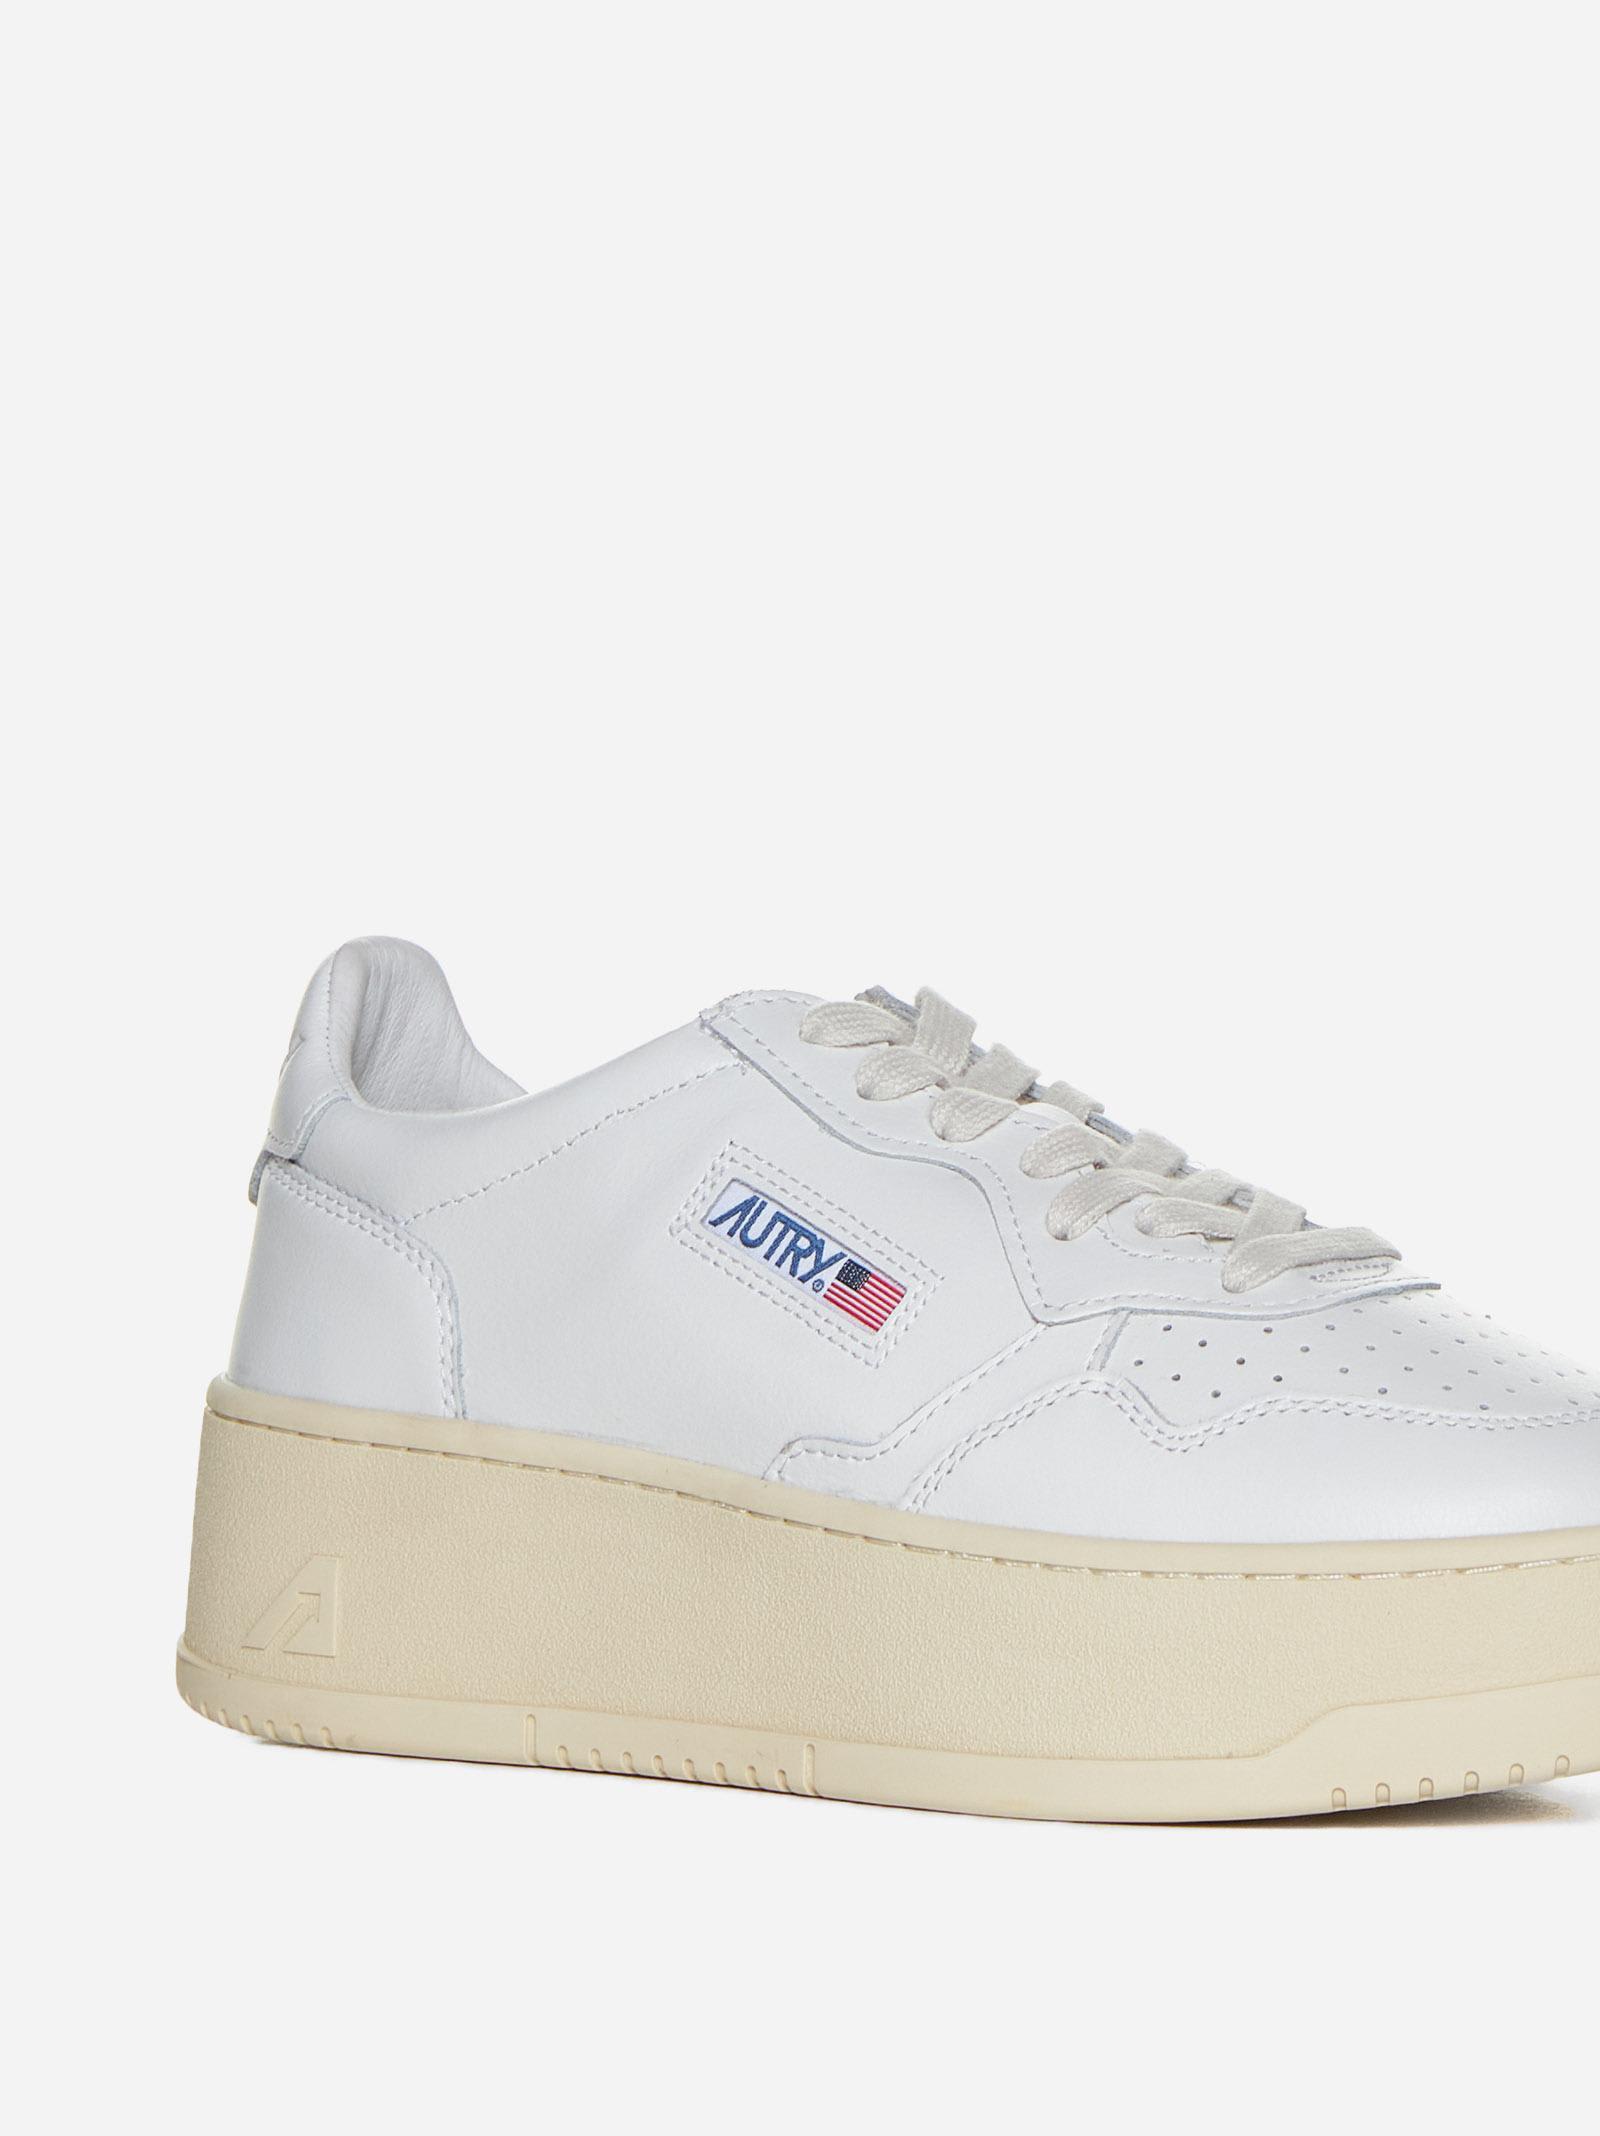 Shop Autry Medalist Platform Leather Sneakers In Bianco